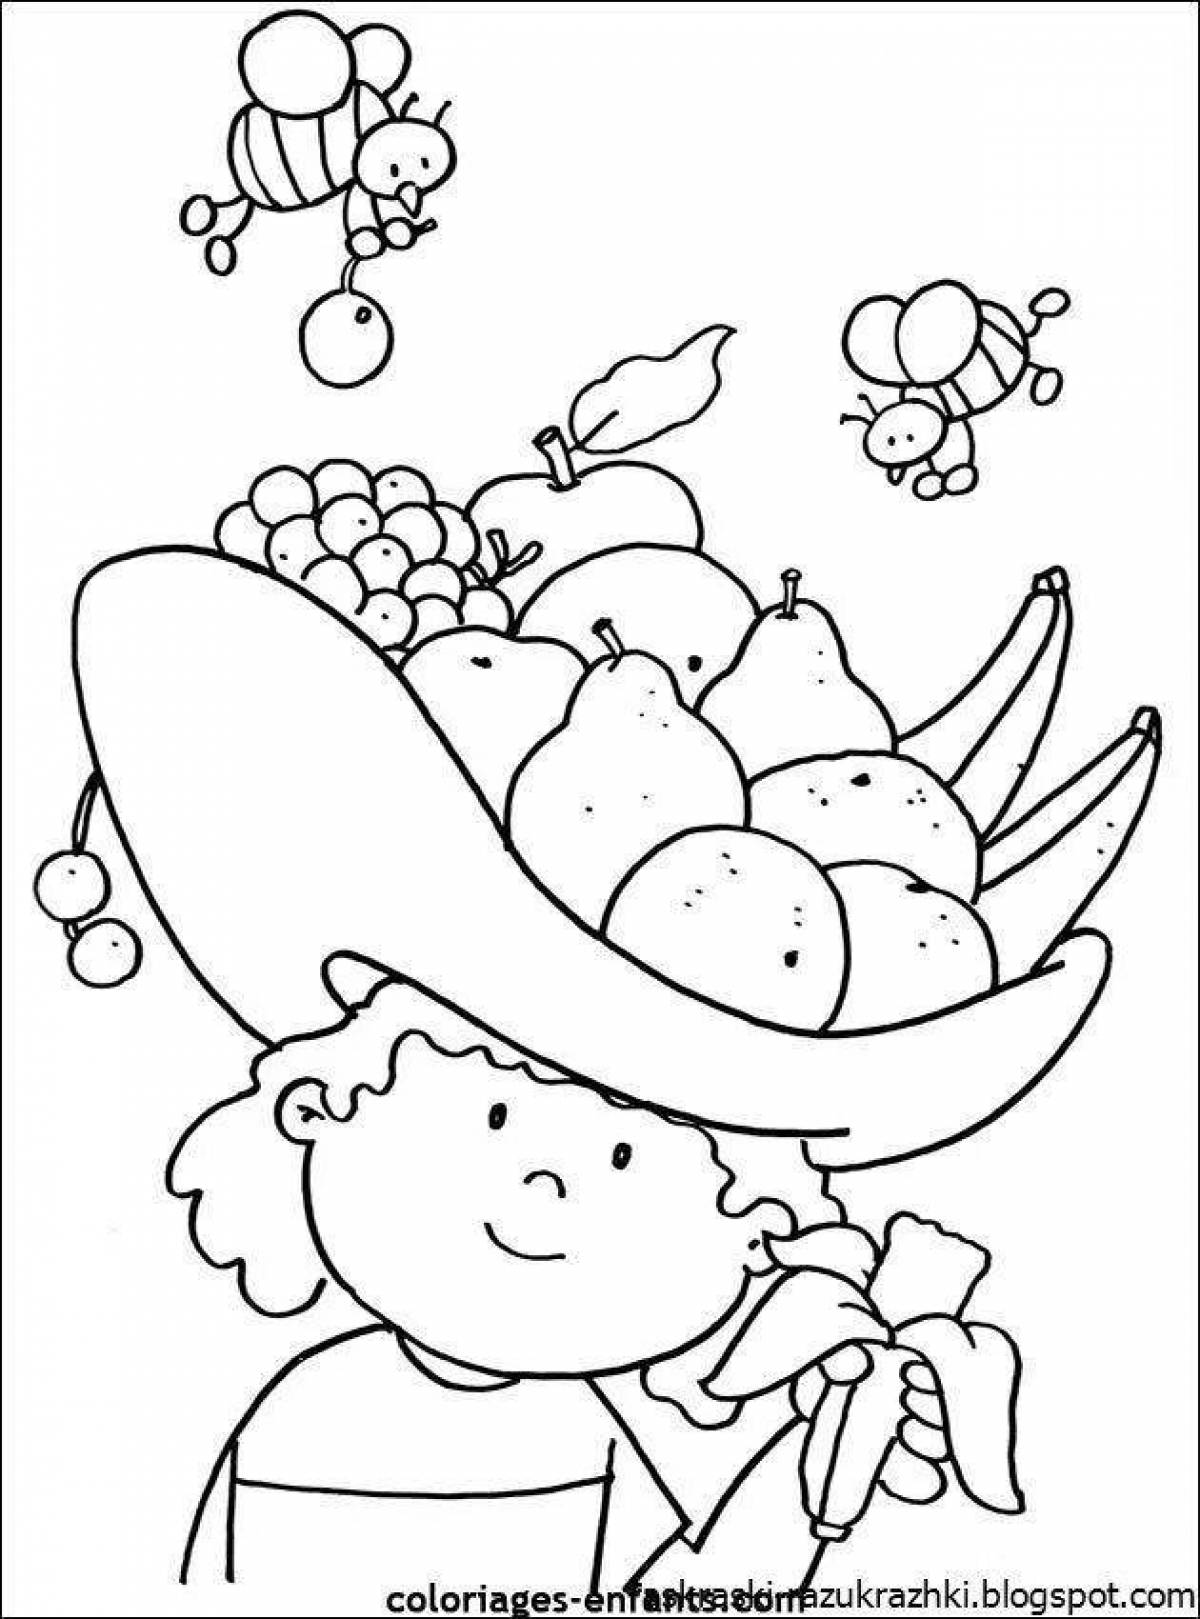 Adorable healthy food coloring book for kids